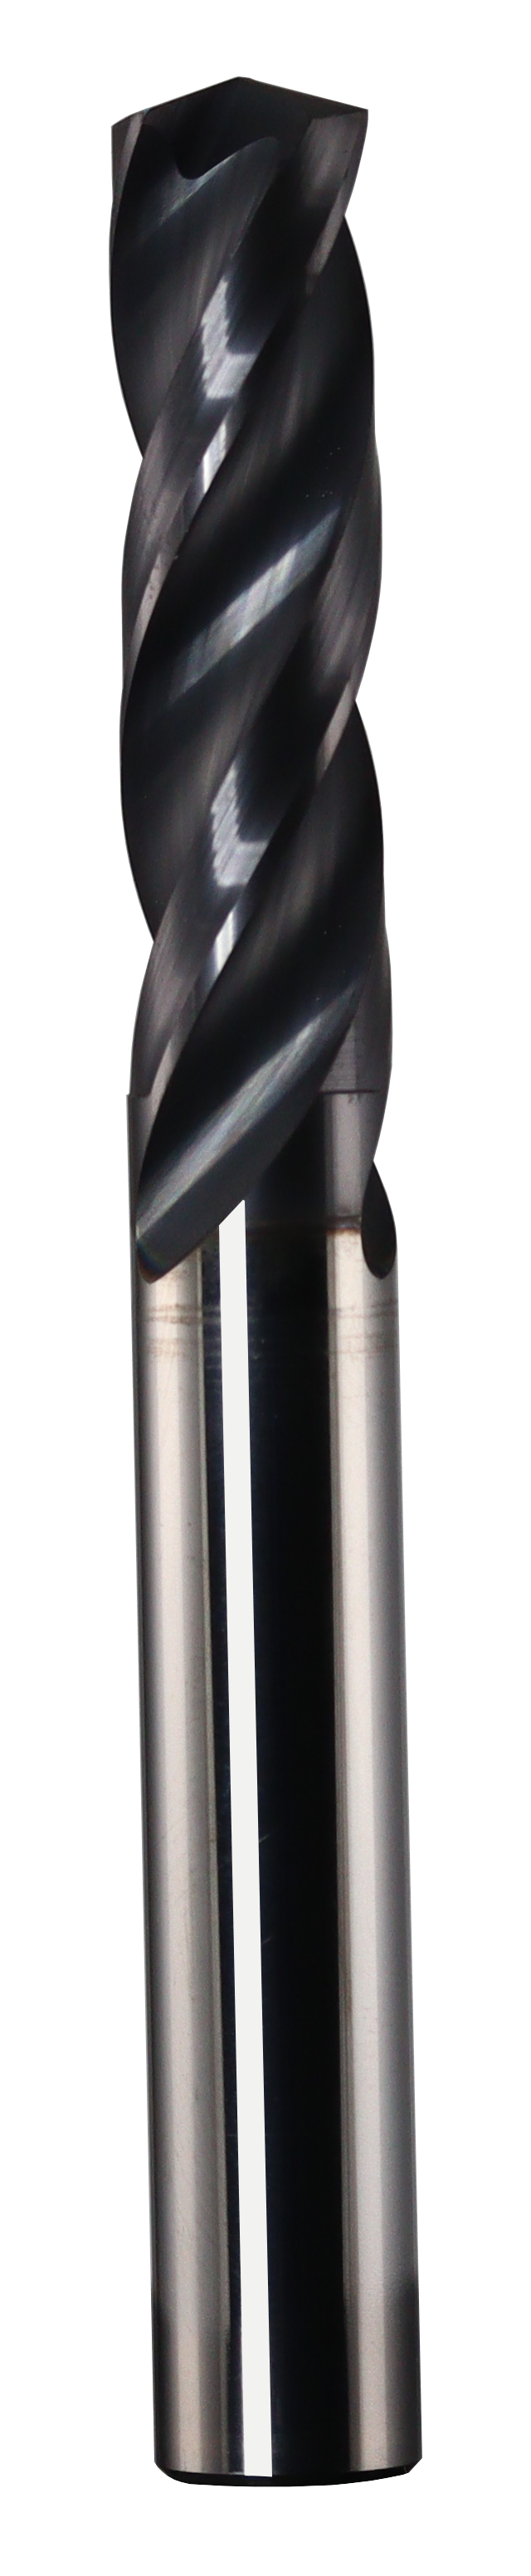 3.60mm Dia, 150 Degree Point, Solid Carbide Drill - 68971